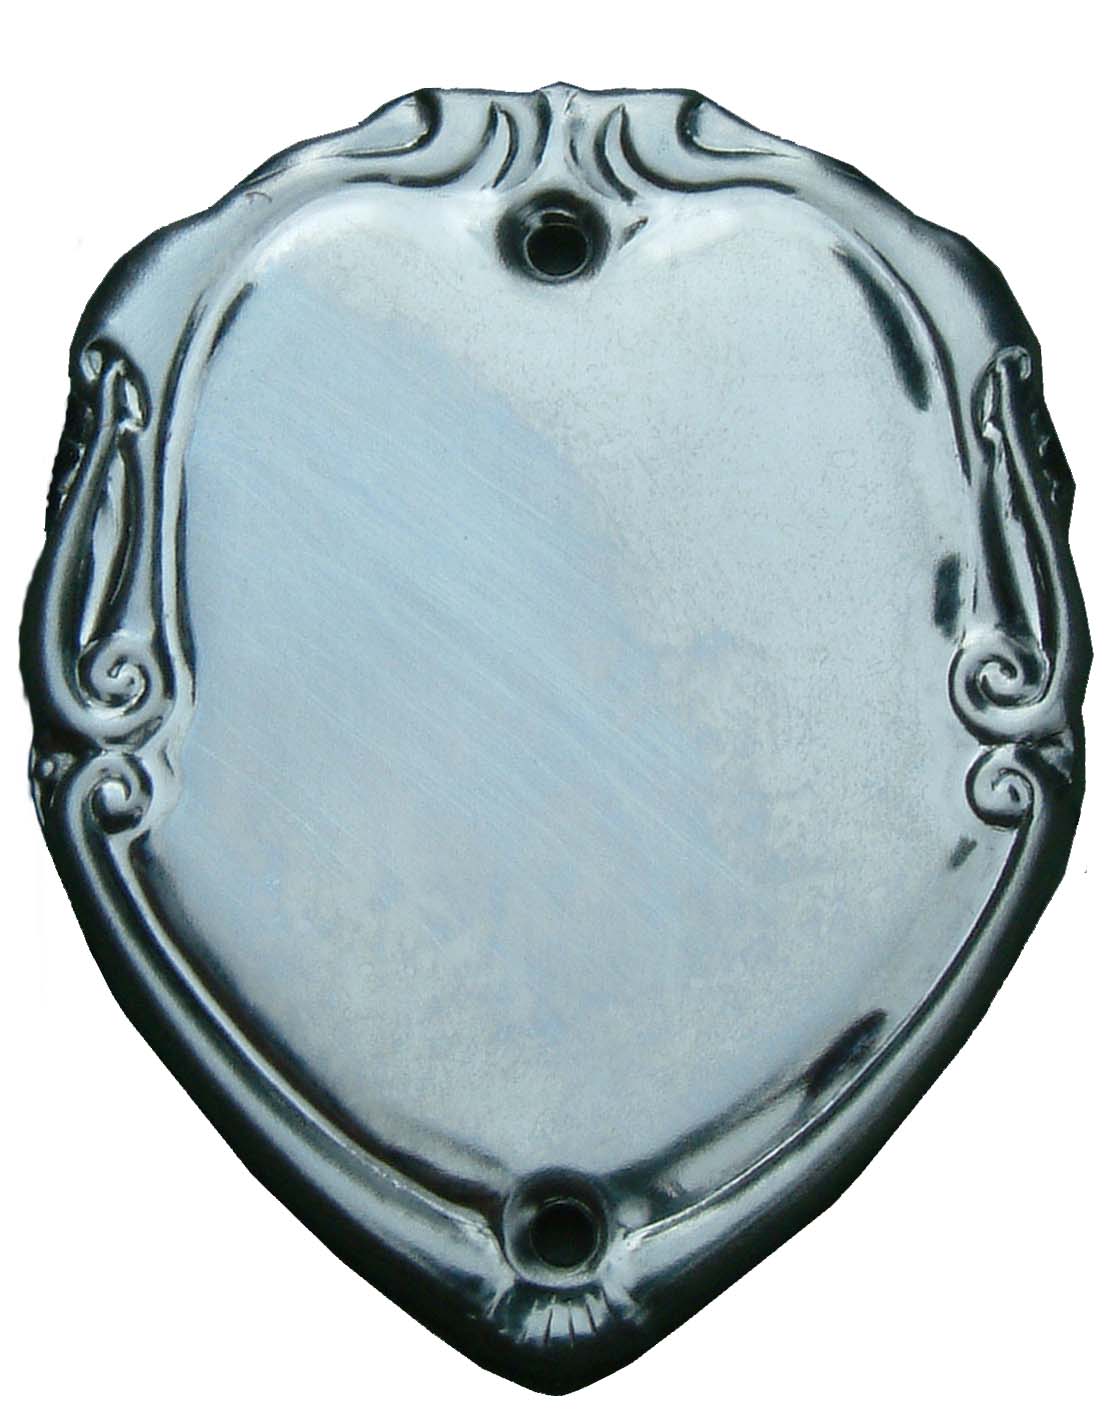 Trophy sheild engraving plate 40x 32mm silver plated